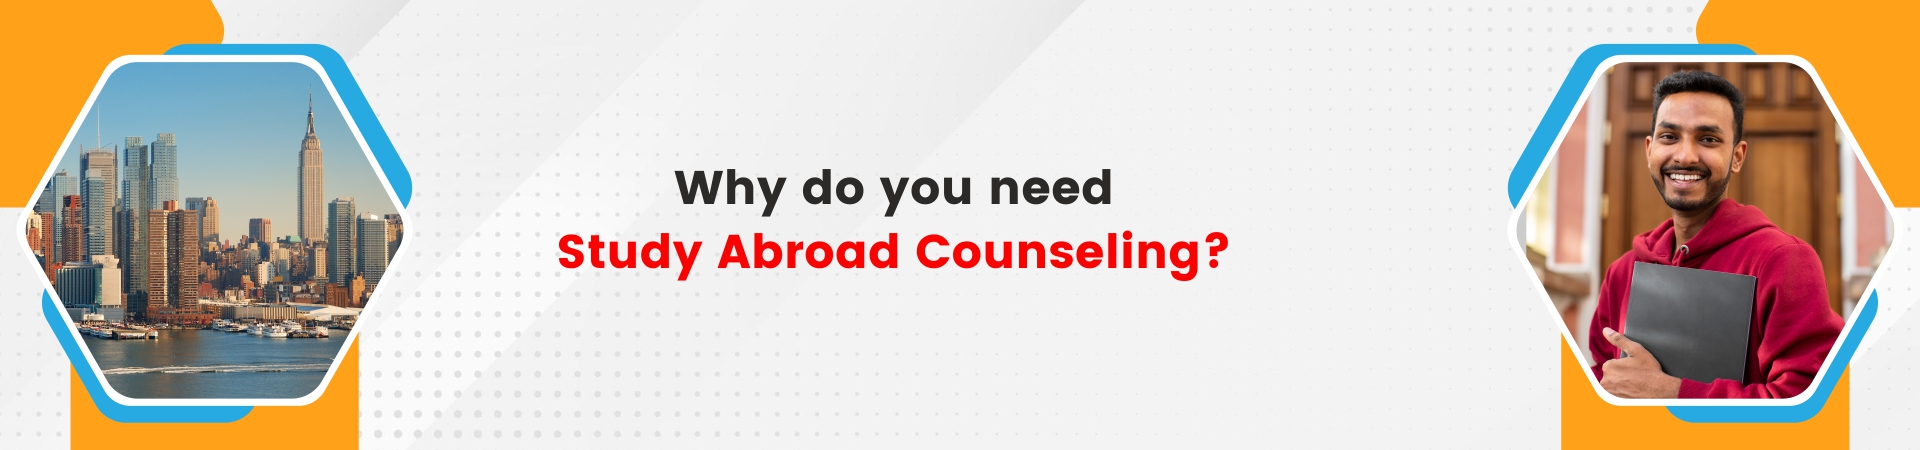 Why do you need Study Abroad Counseling?